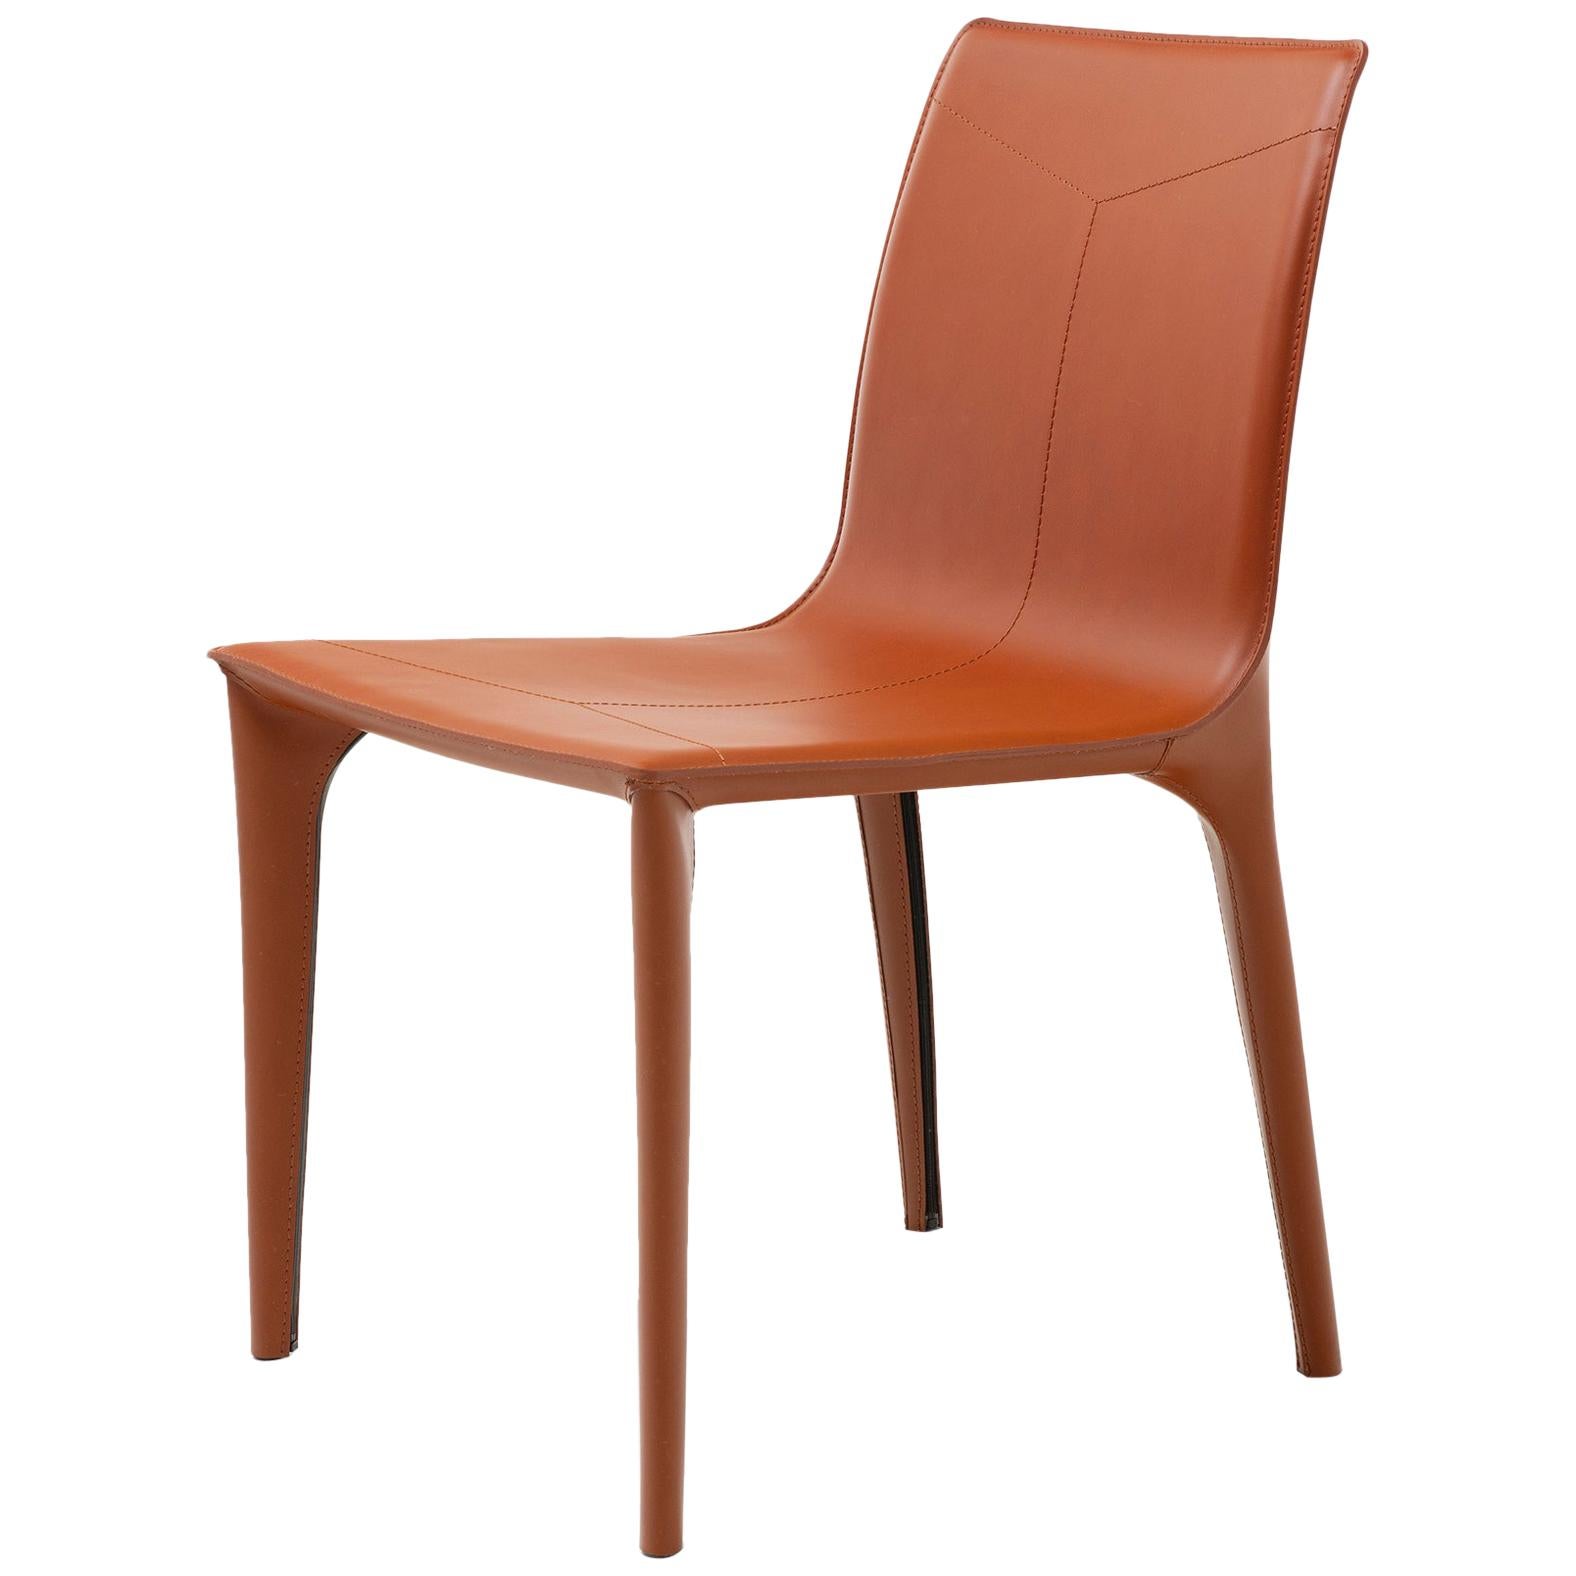 HOLLY HUNT Adriatic Dining Side Chair in Sierra Leather